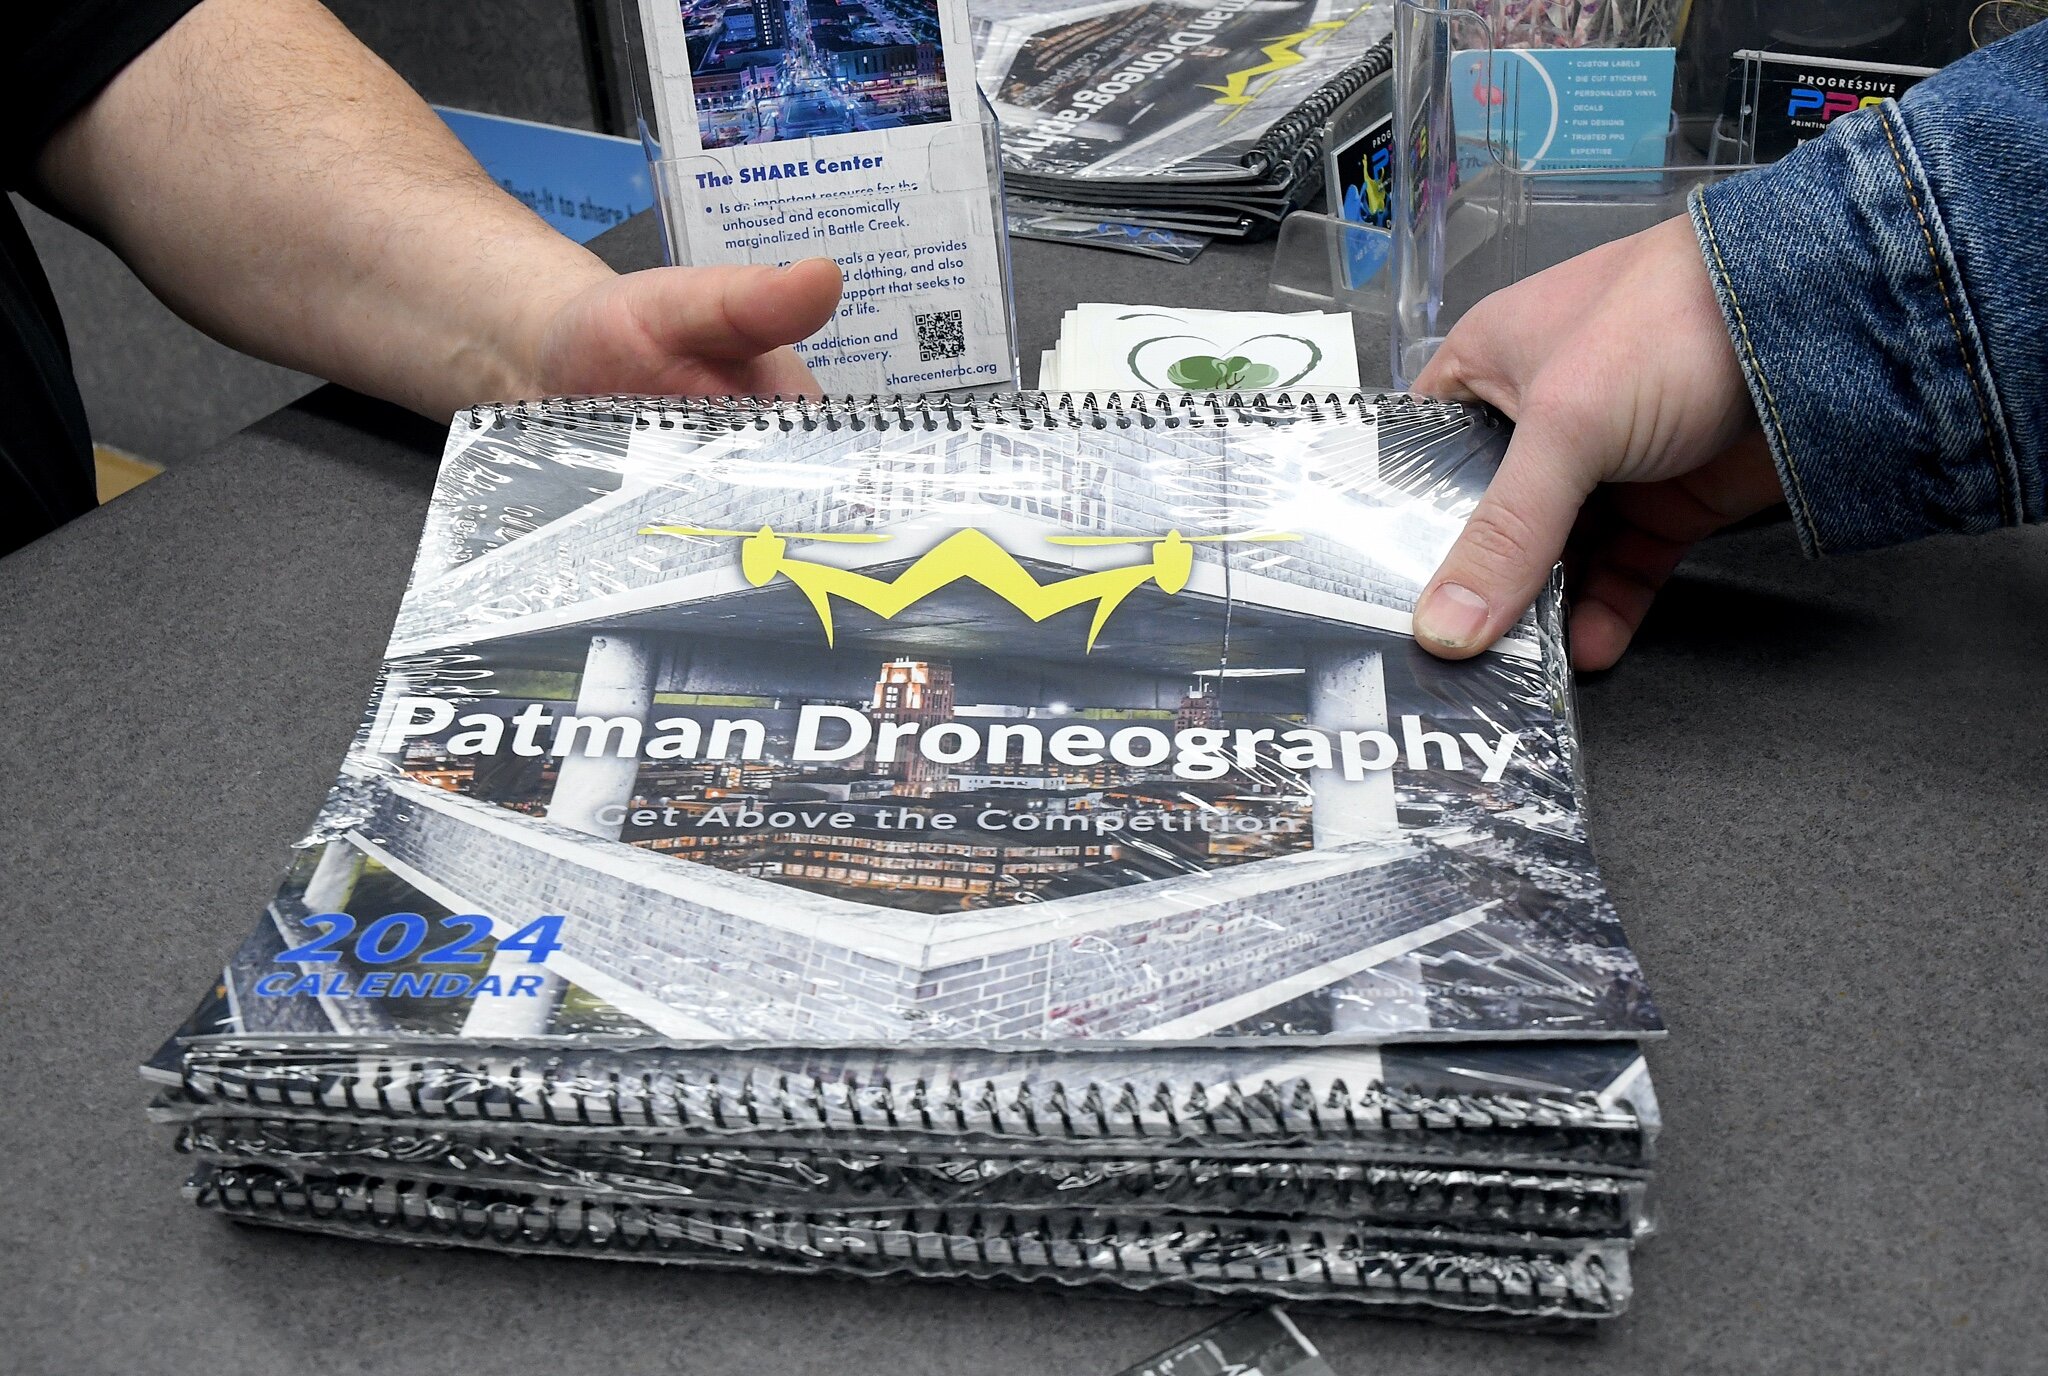 Patman Droneography’s 2024 calendar is printed at Progressive Printing. Progressive Printing are printing Patman Droneography artwork for a $50 donation to the SHARE Center. 5 Robert Elchert is the executive director or the SHARE Center.